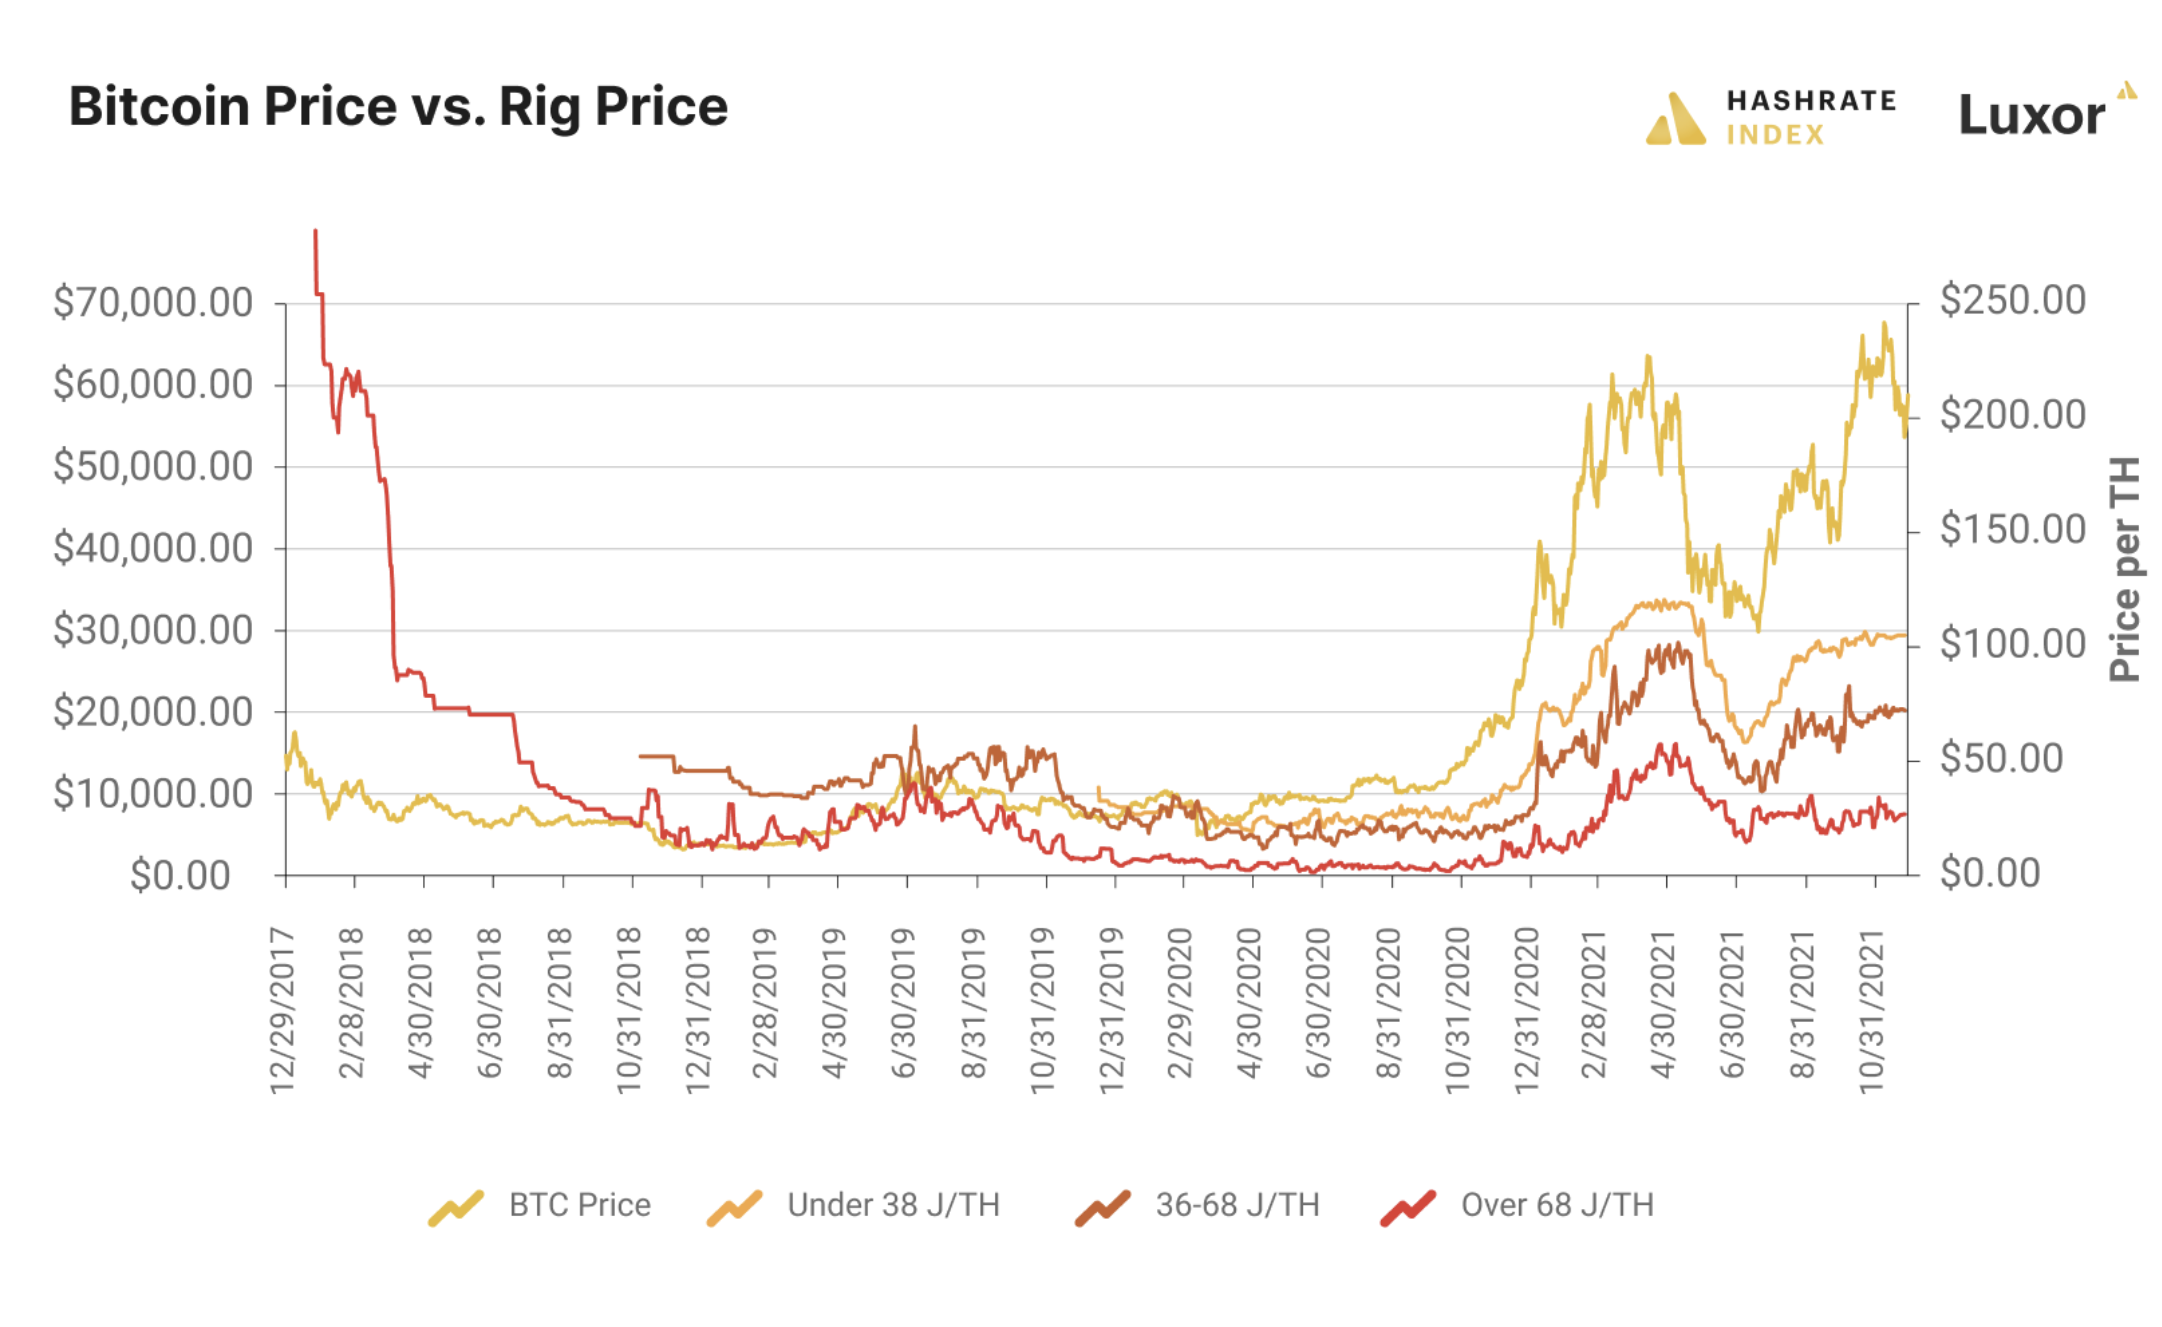 Bitcoin price charted along with Bitcoin ASIC prices for different efficiency tiers